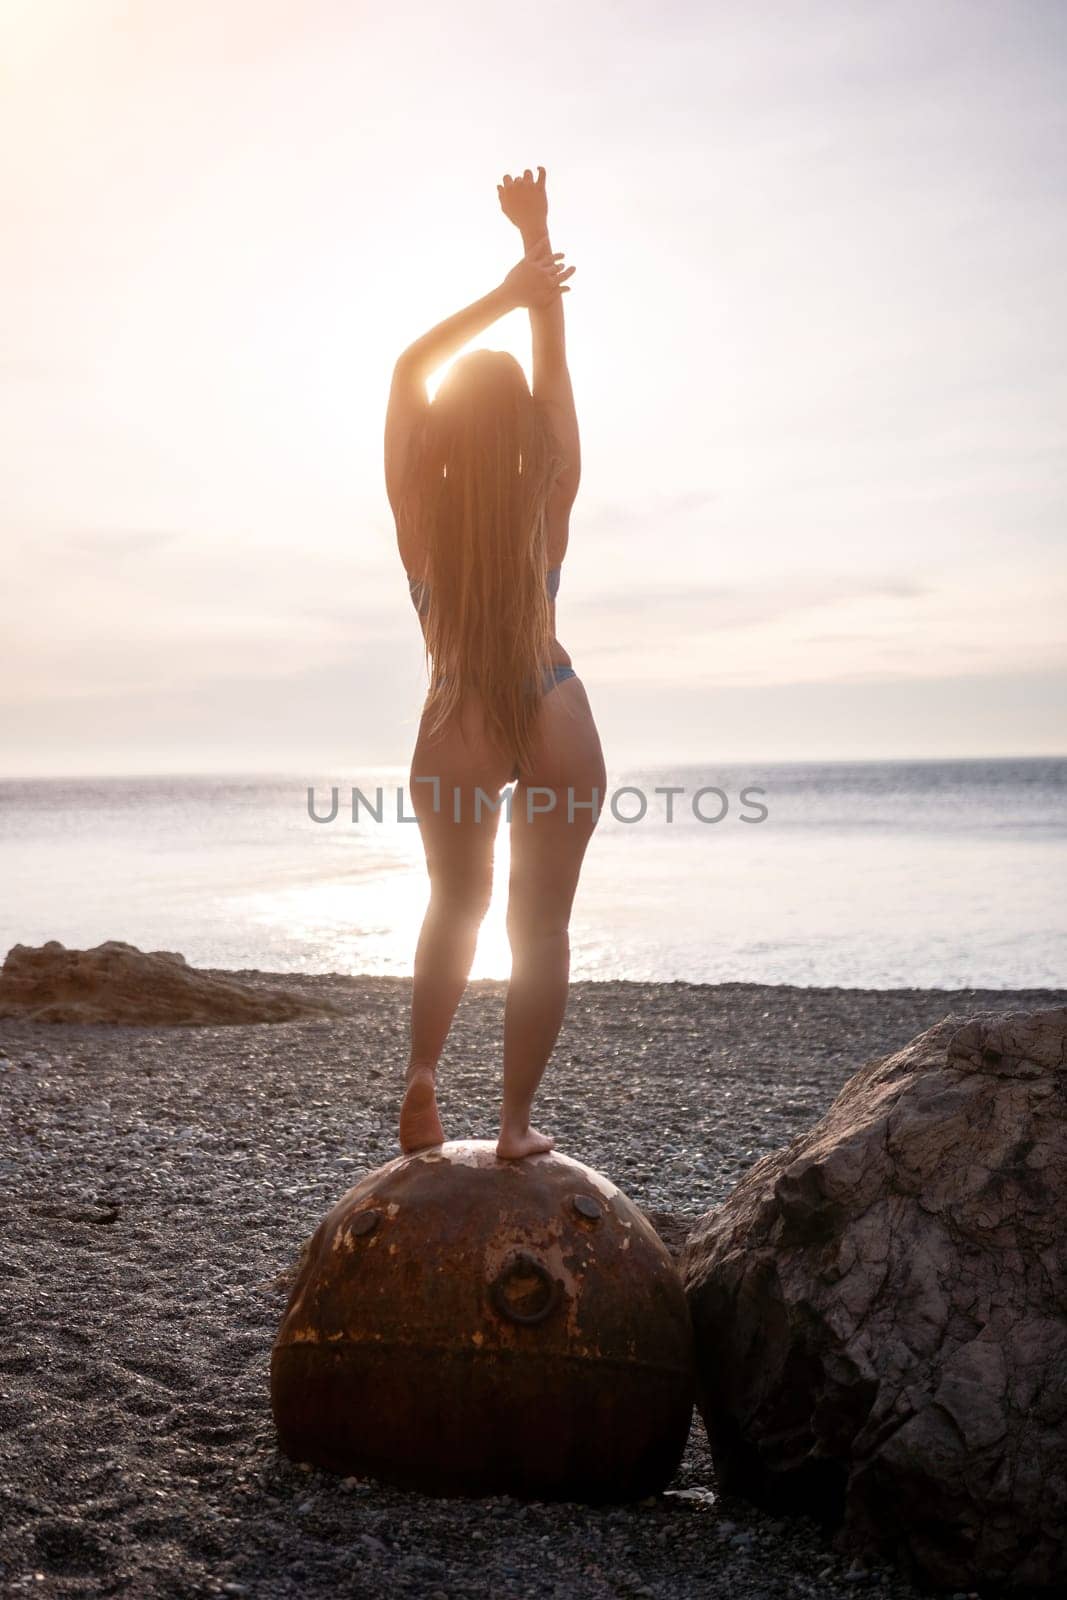 Woman summer travel sea. A happy tourist enjoys taking pictures of her travels, posing by an old, rusty sea mine on a beach surrounded by volcanic mountains, sharing travel adventure journey by panophotograph